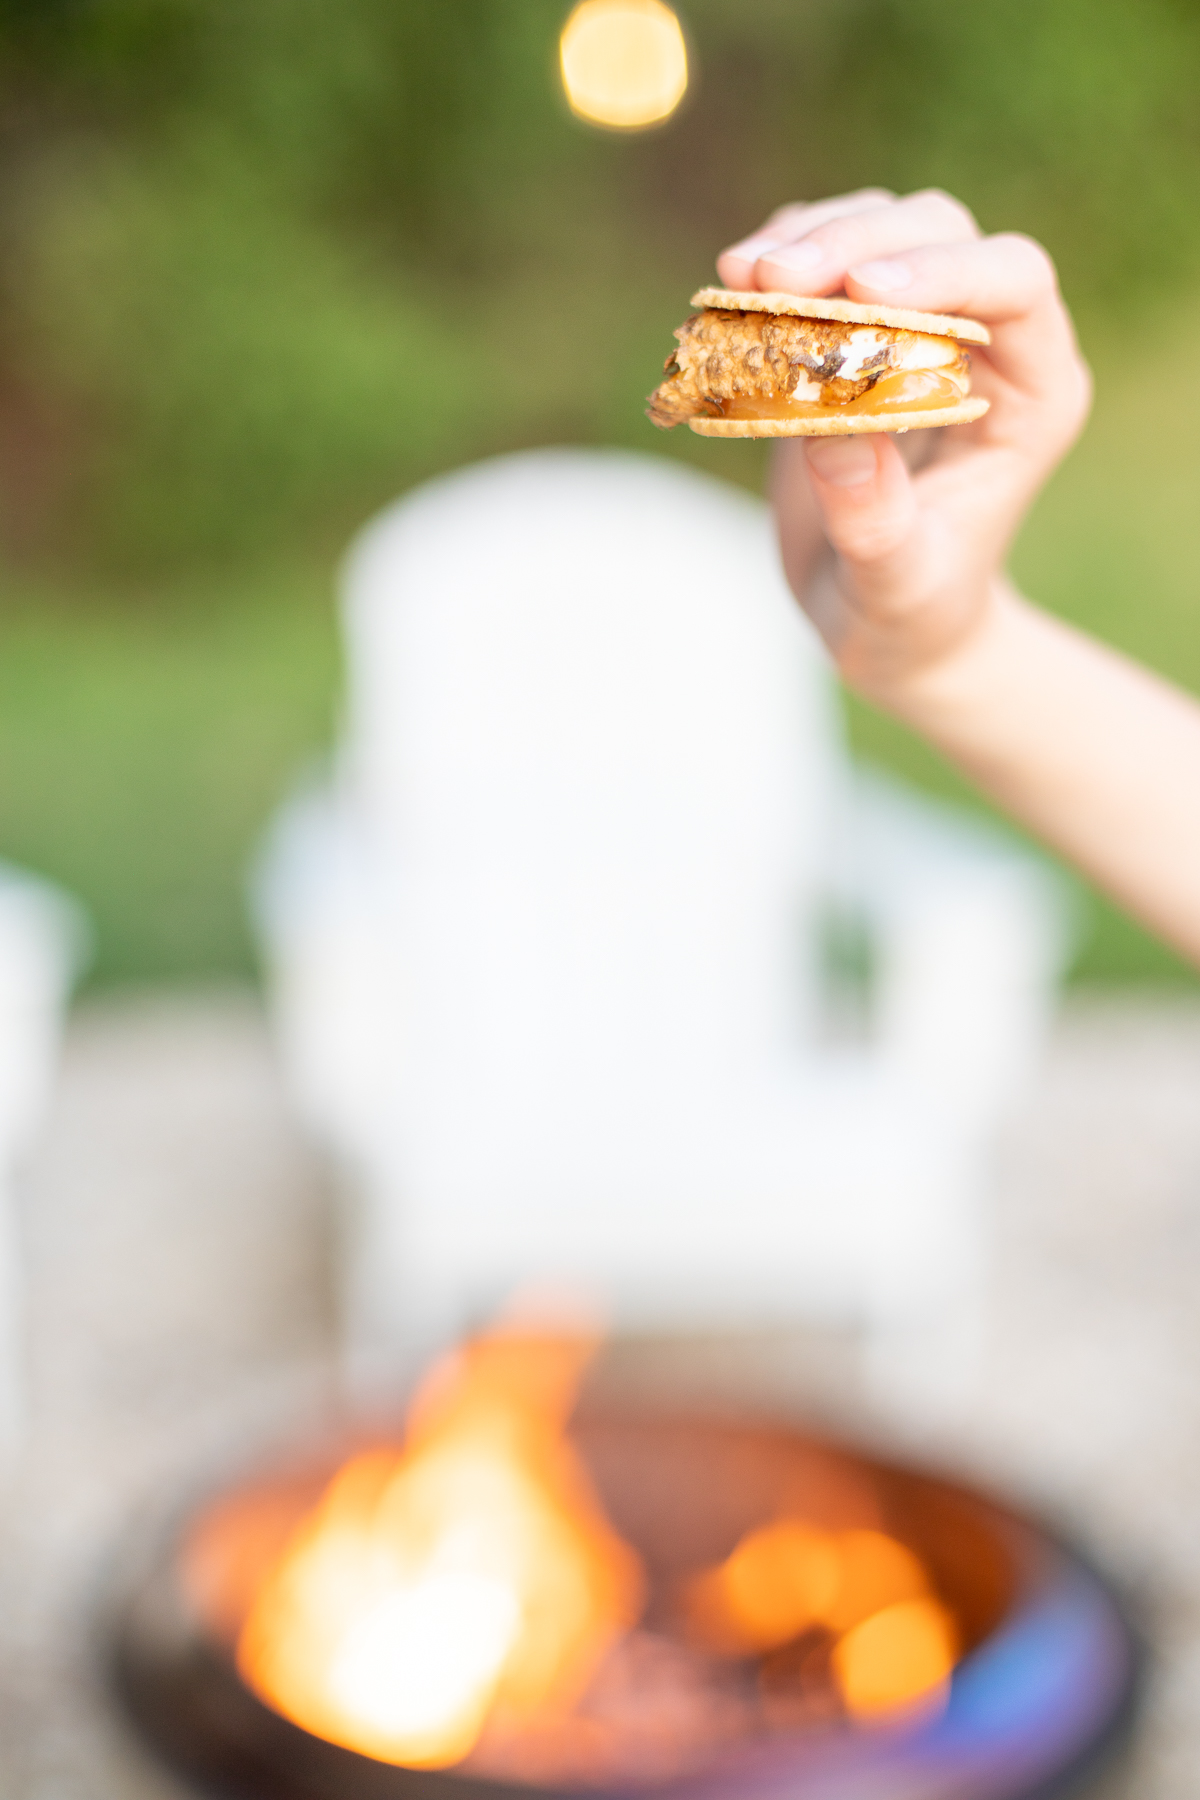 A hand holding a s'mores with a firepit in the background